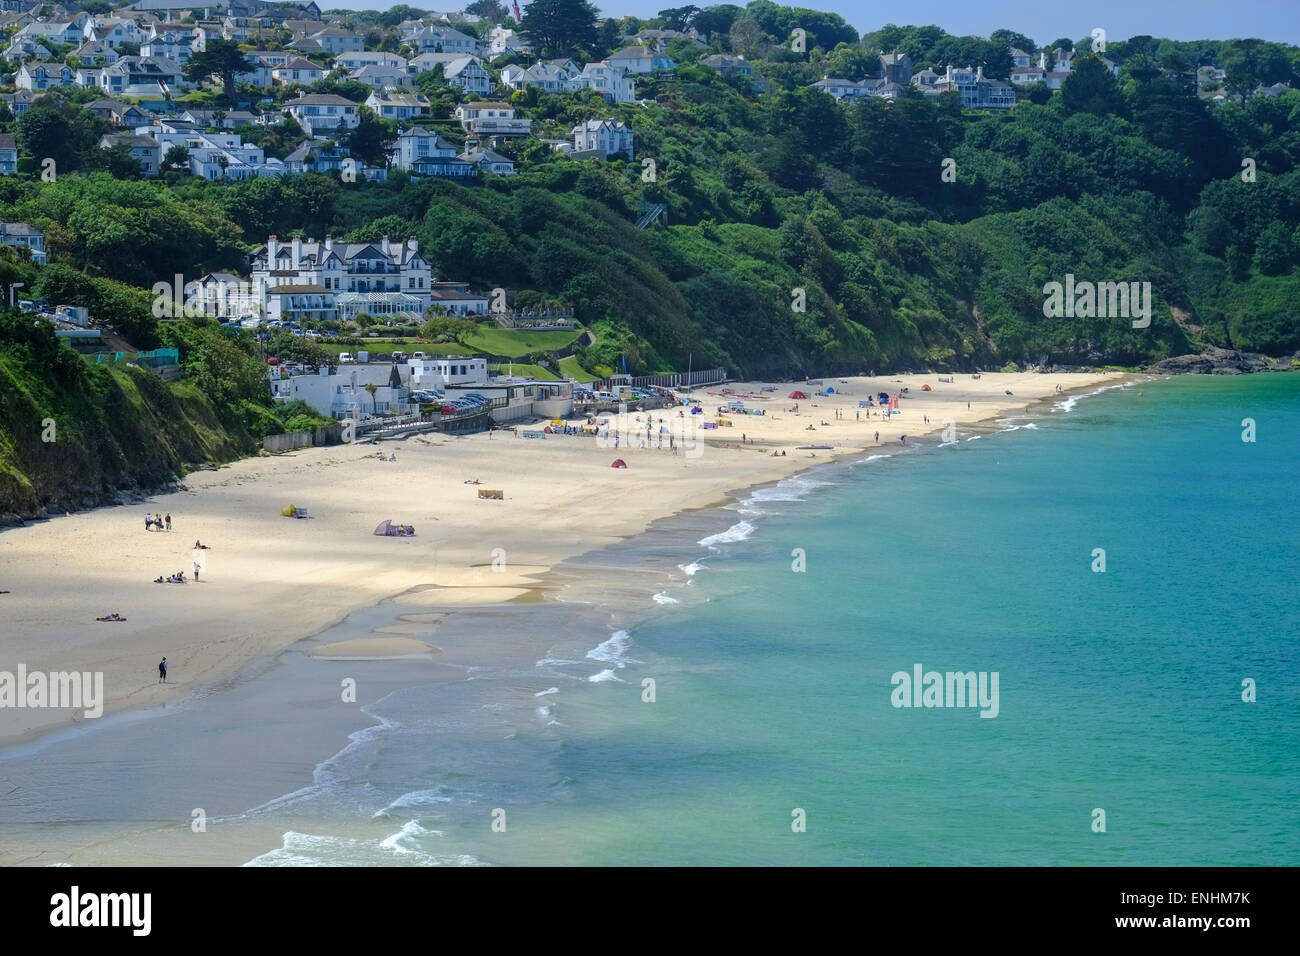 Carbis Bay, Cornwall: Magnificent beach with the Carbis Bay Hotel overlooking the Bay Stock Photo